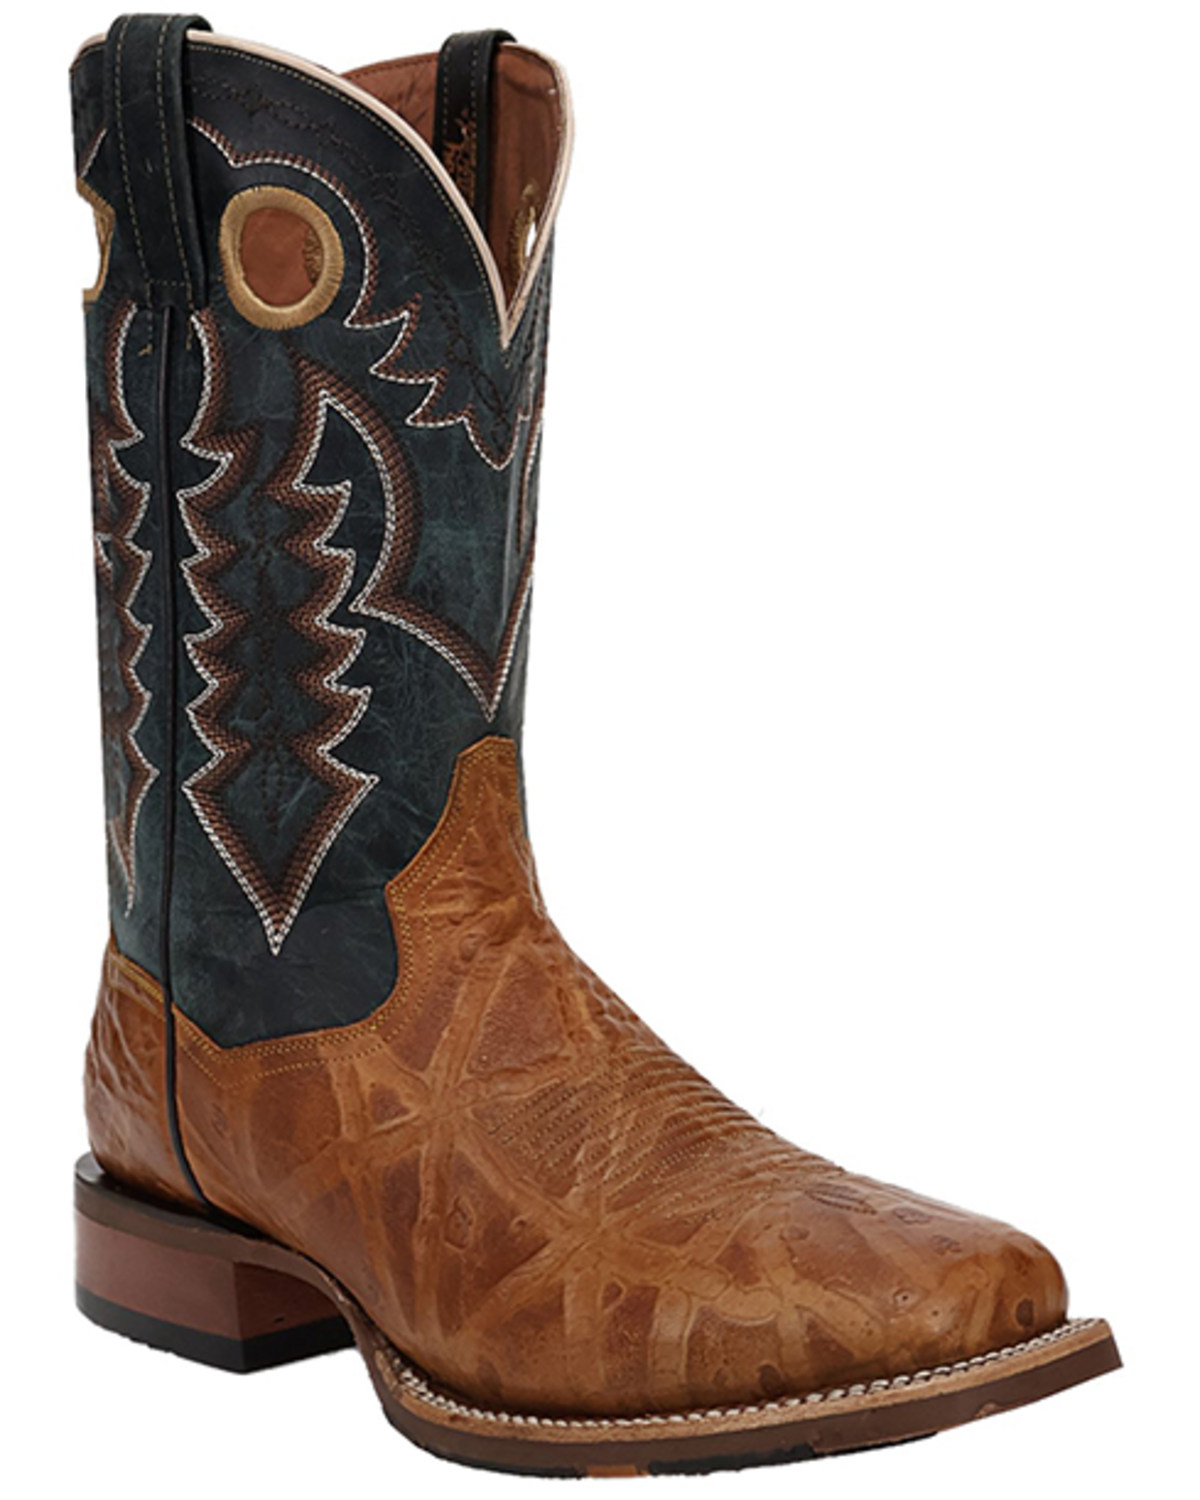 Dan Post Men's Pull-On Western Boots - Broad Square